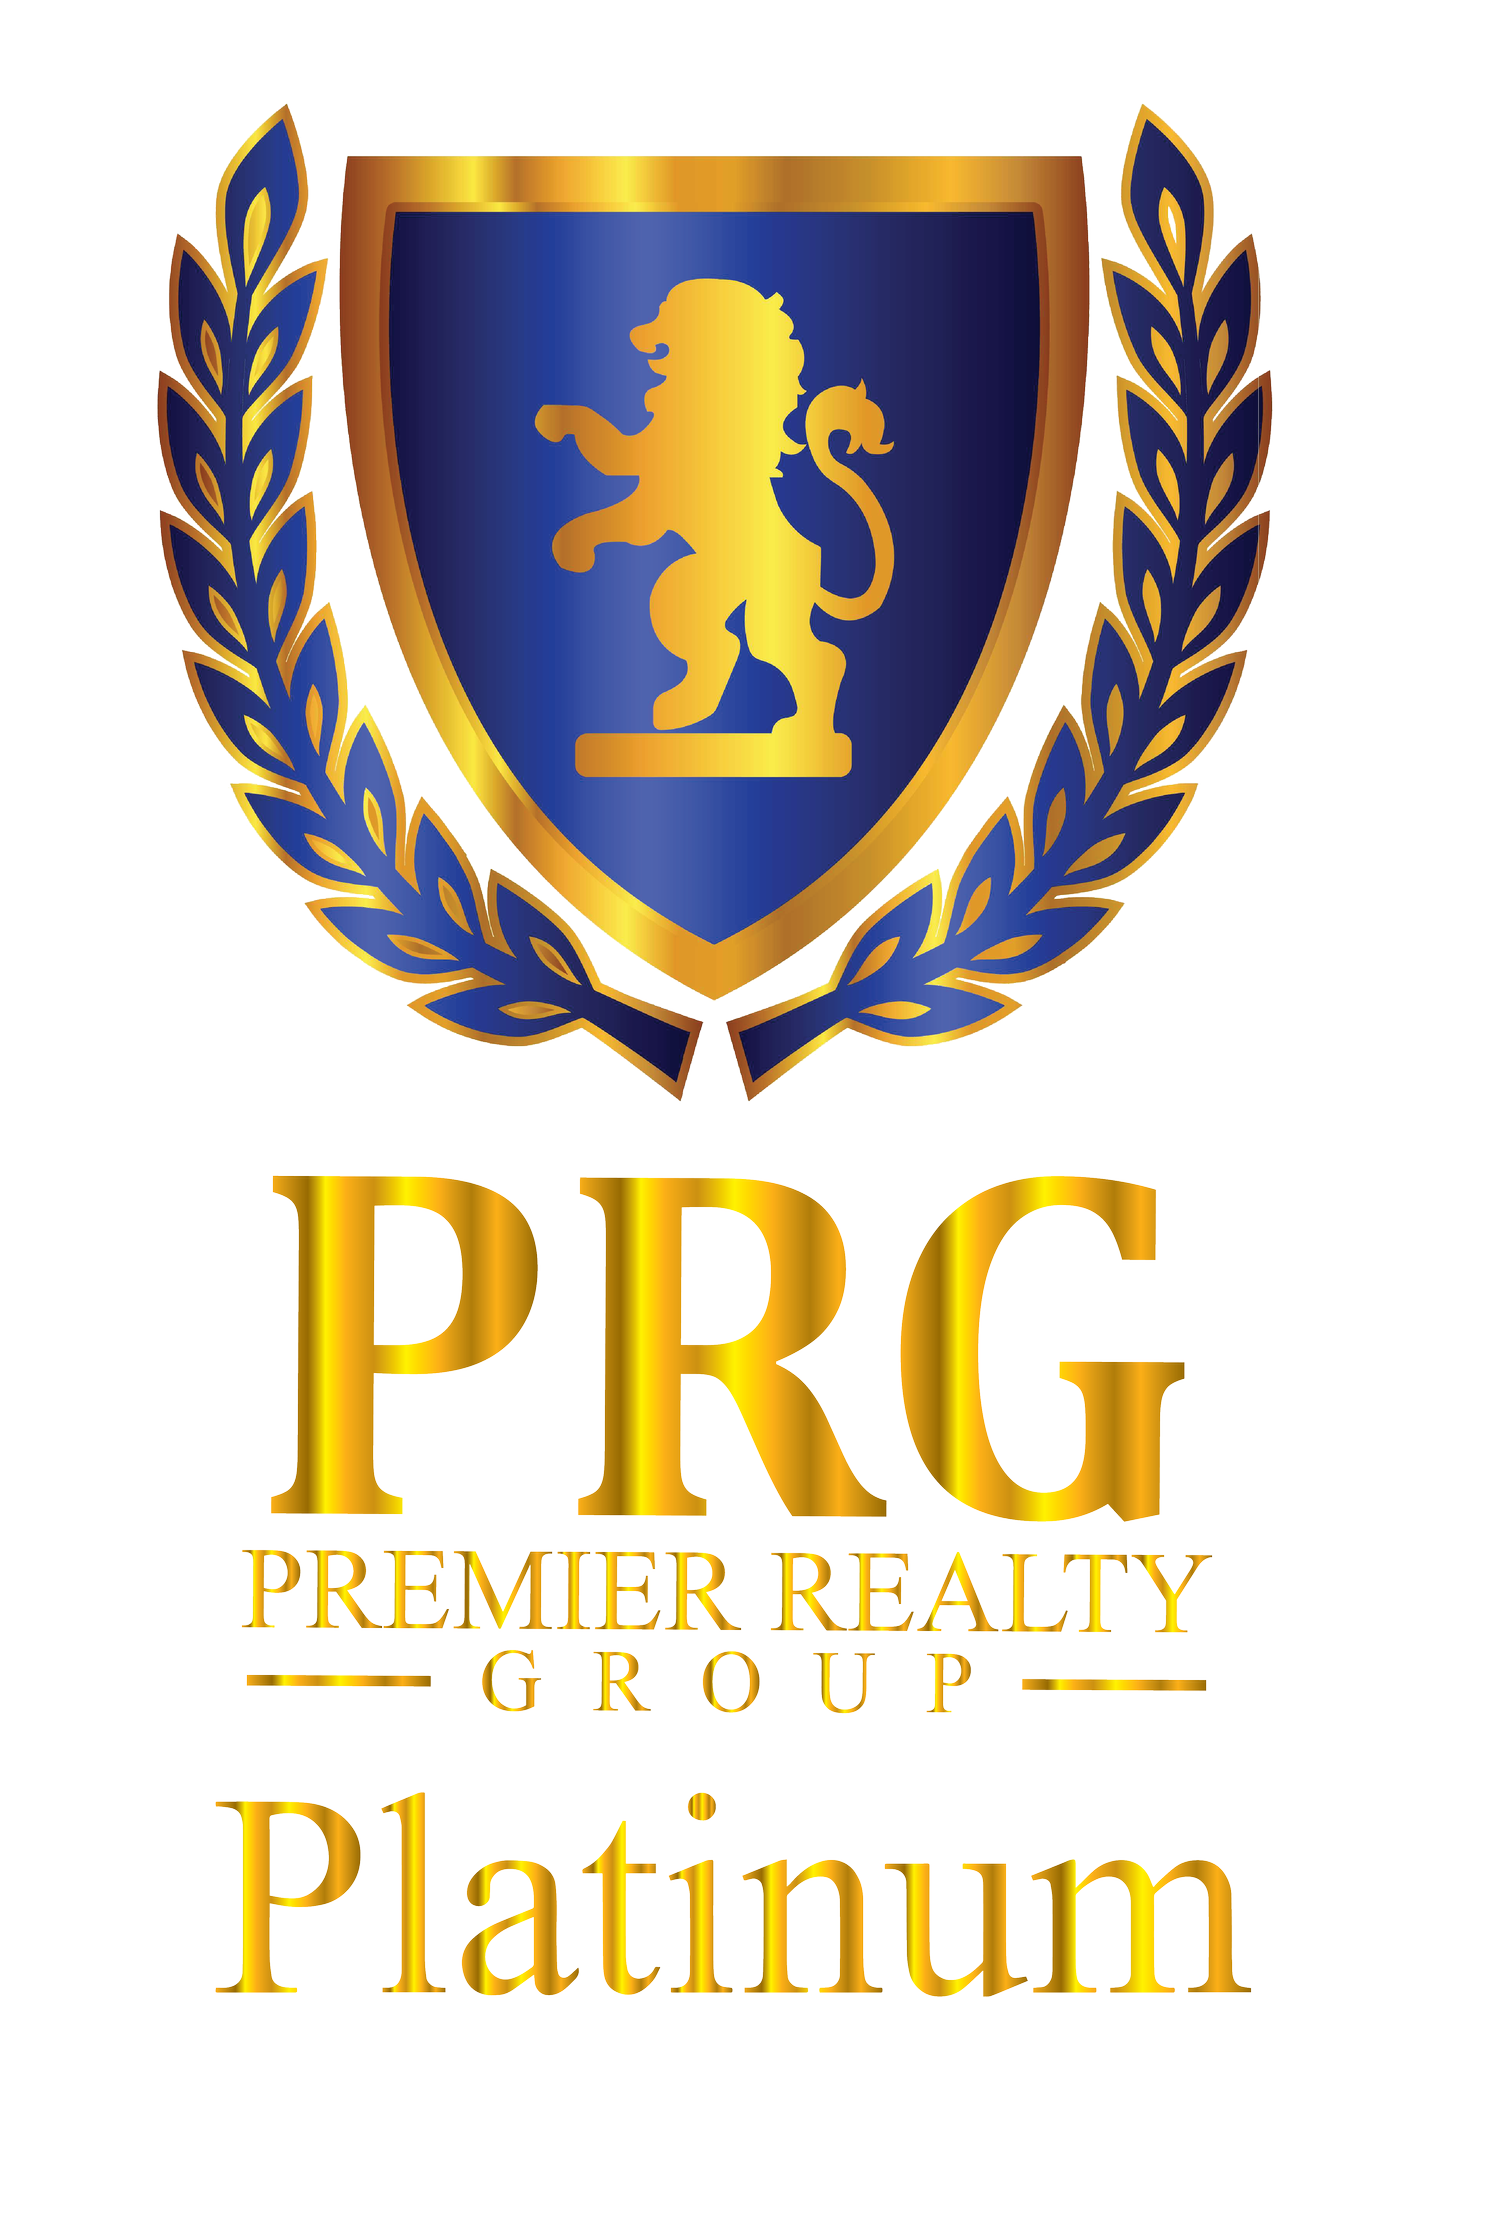 ​Premier Realty Group